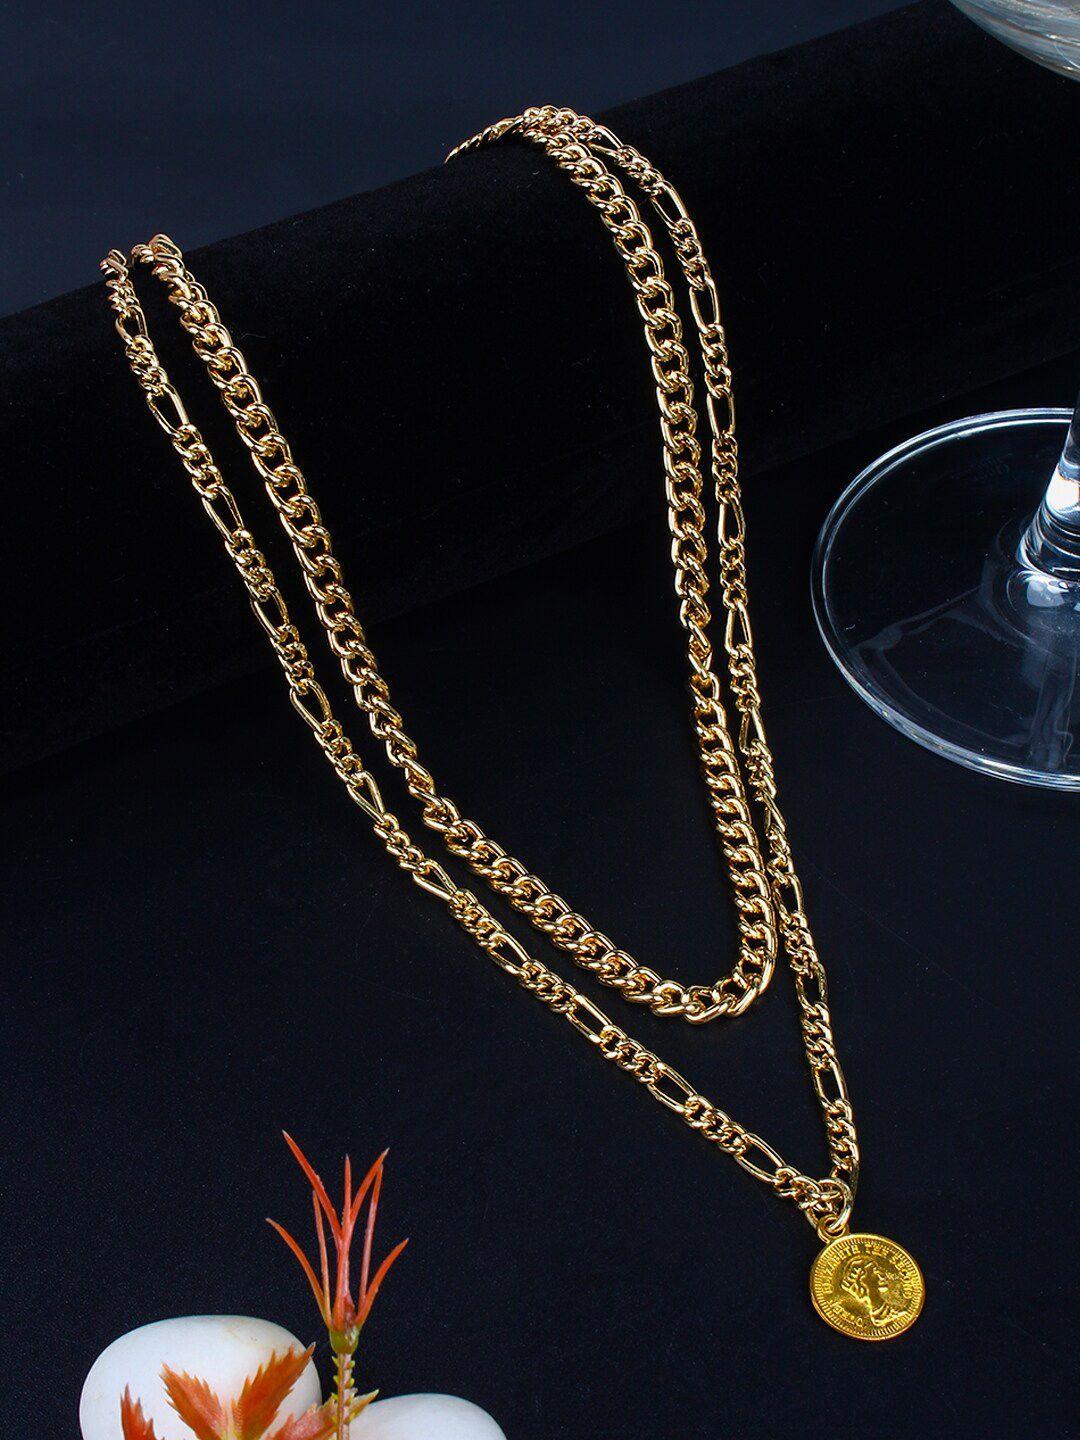 stylecast x kpop gold-toned brass gold-plated handcrafted necklace